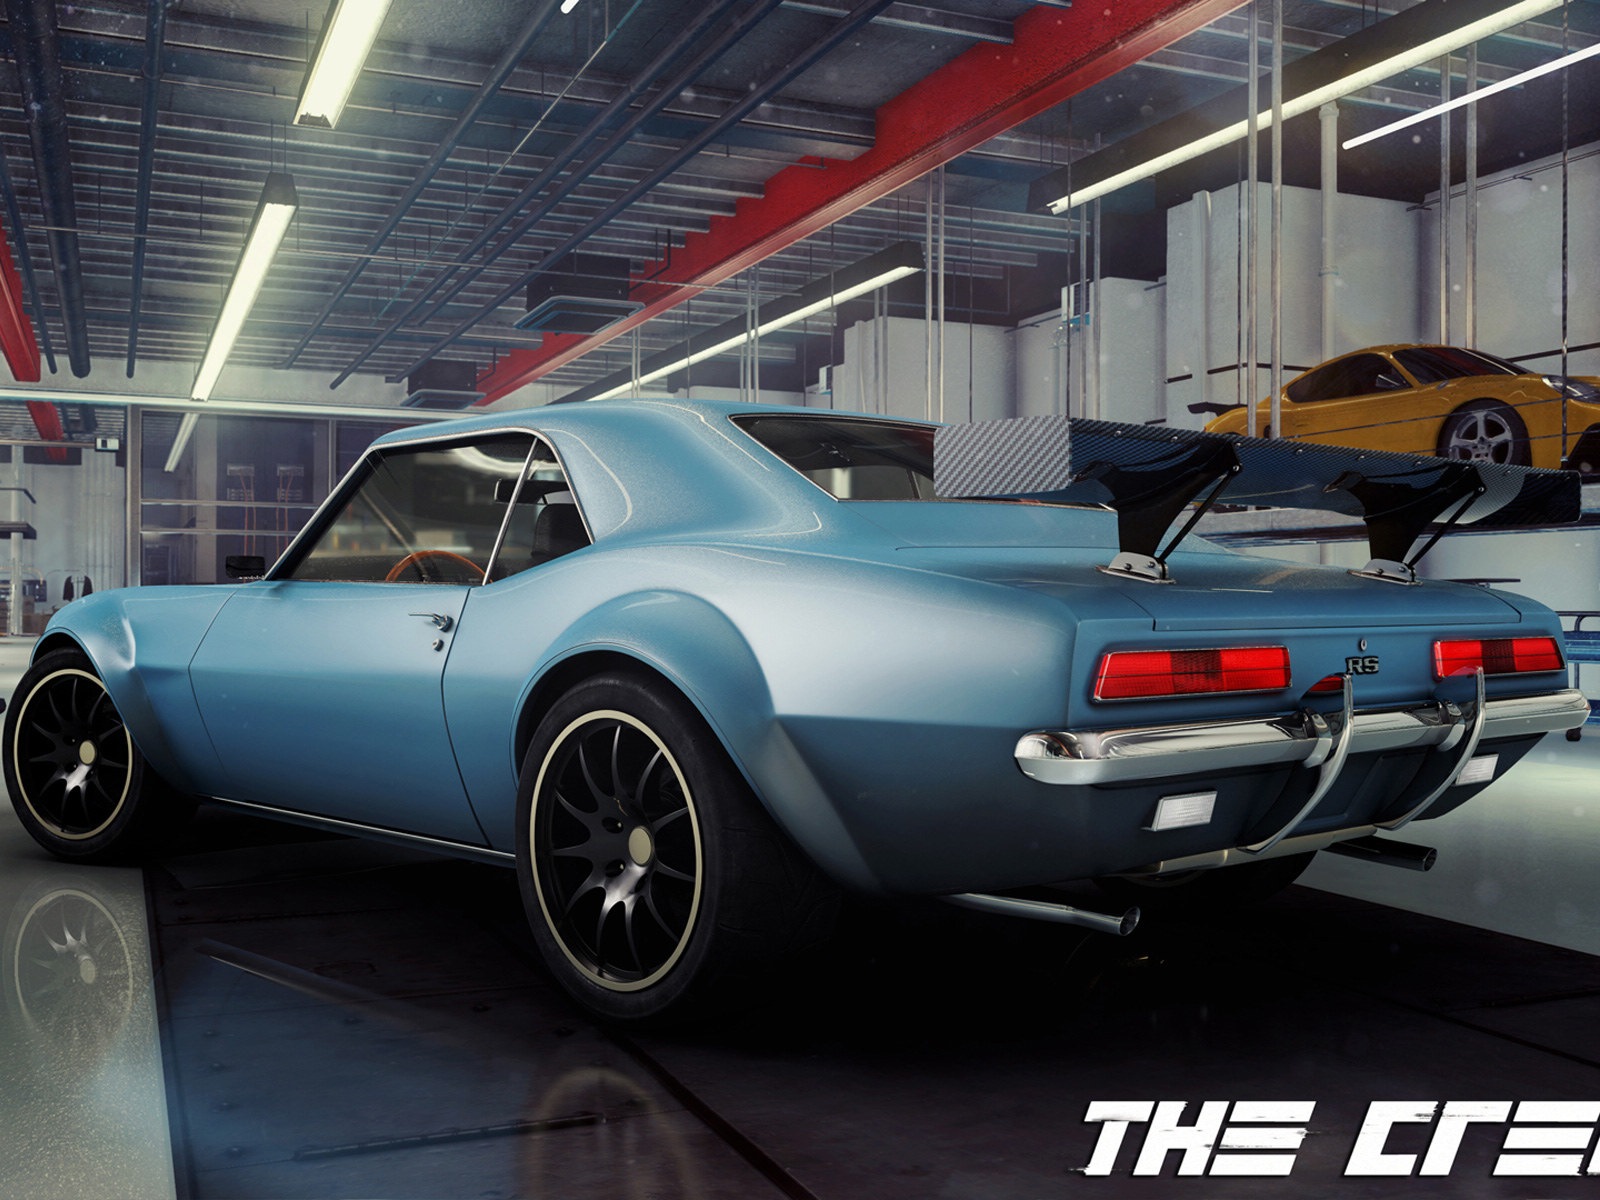 The Crew game HD wallpapers #12 - 1600x1200